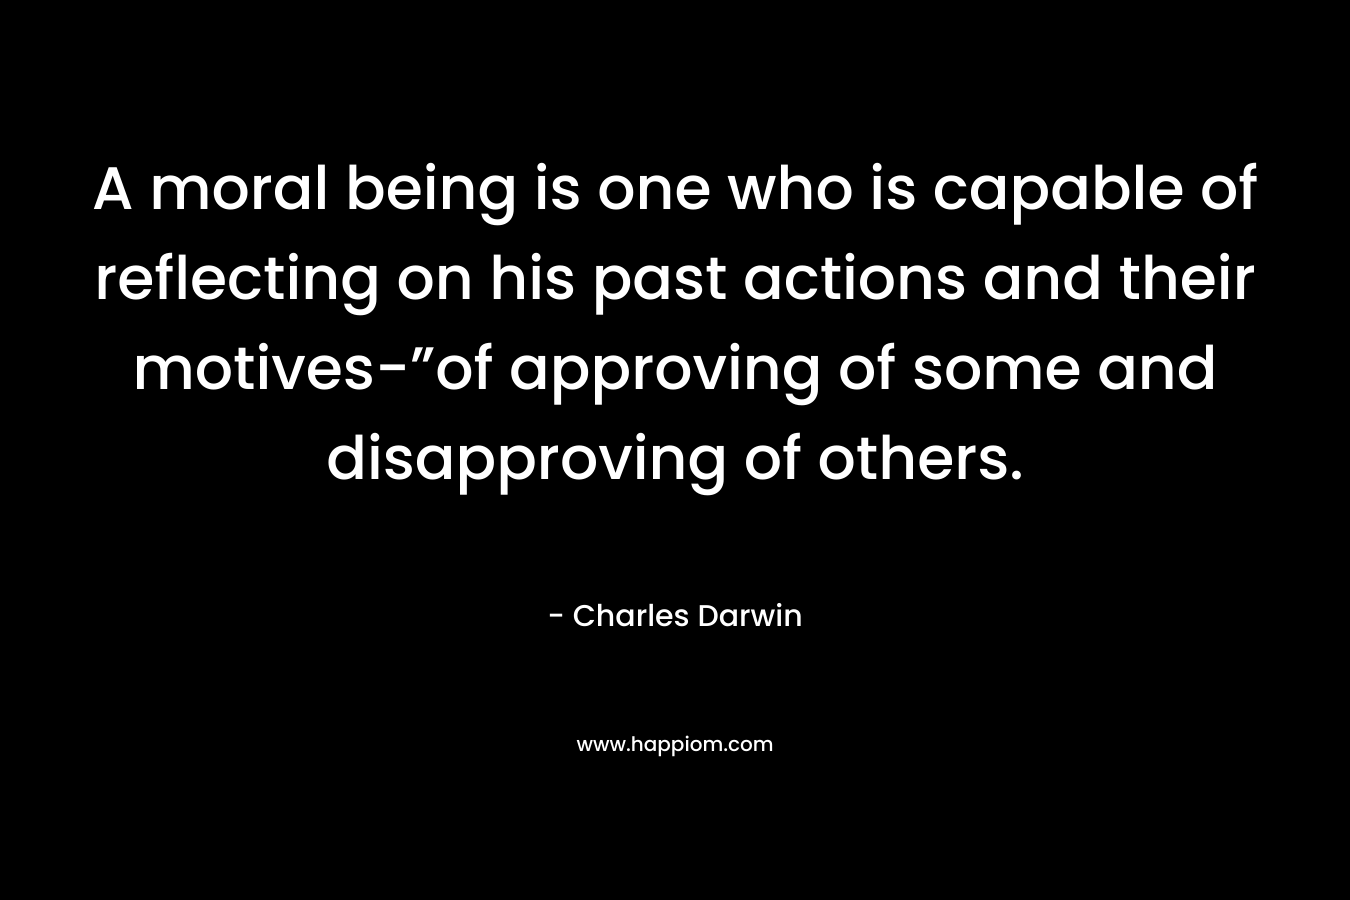 A moral being is one who is capable of reflecting on his past actions and their motives-”of approving of some and disapproving of others. – Charles Darwin